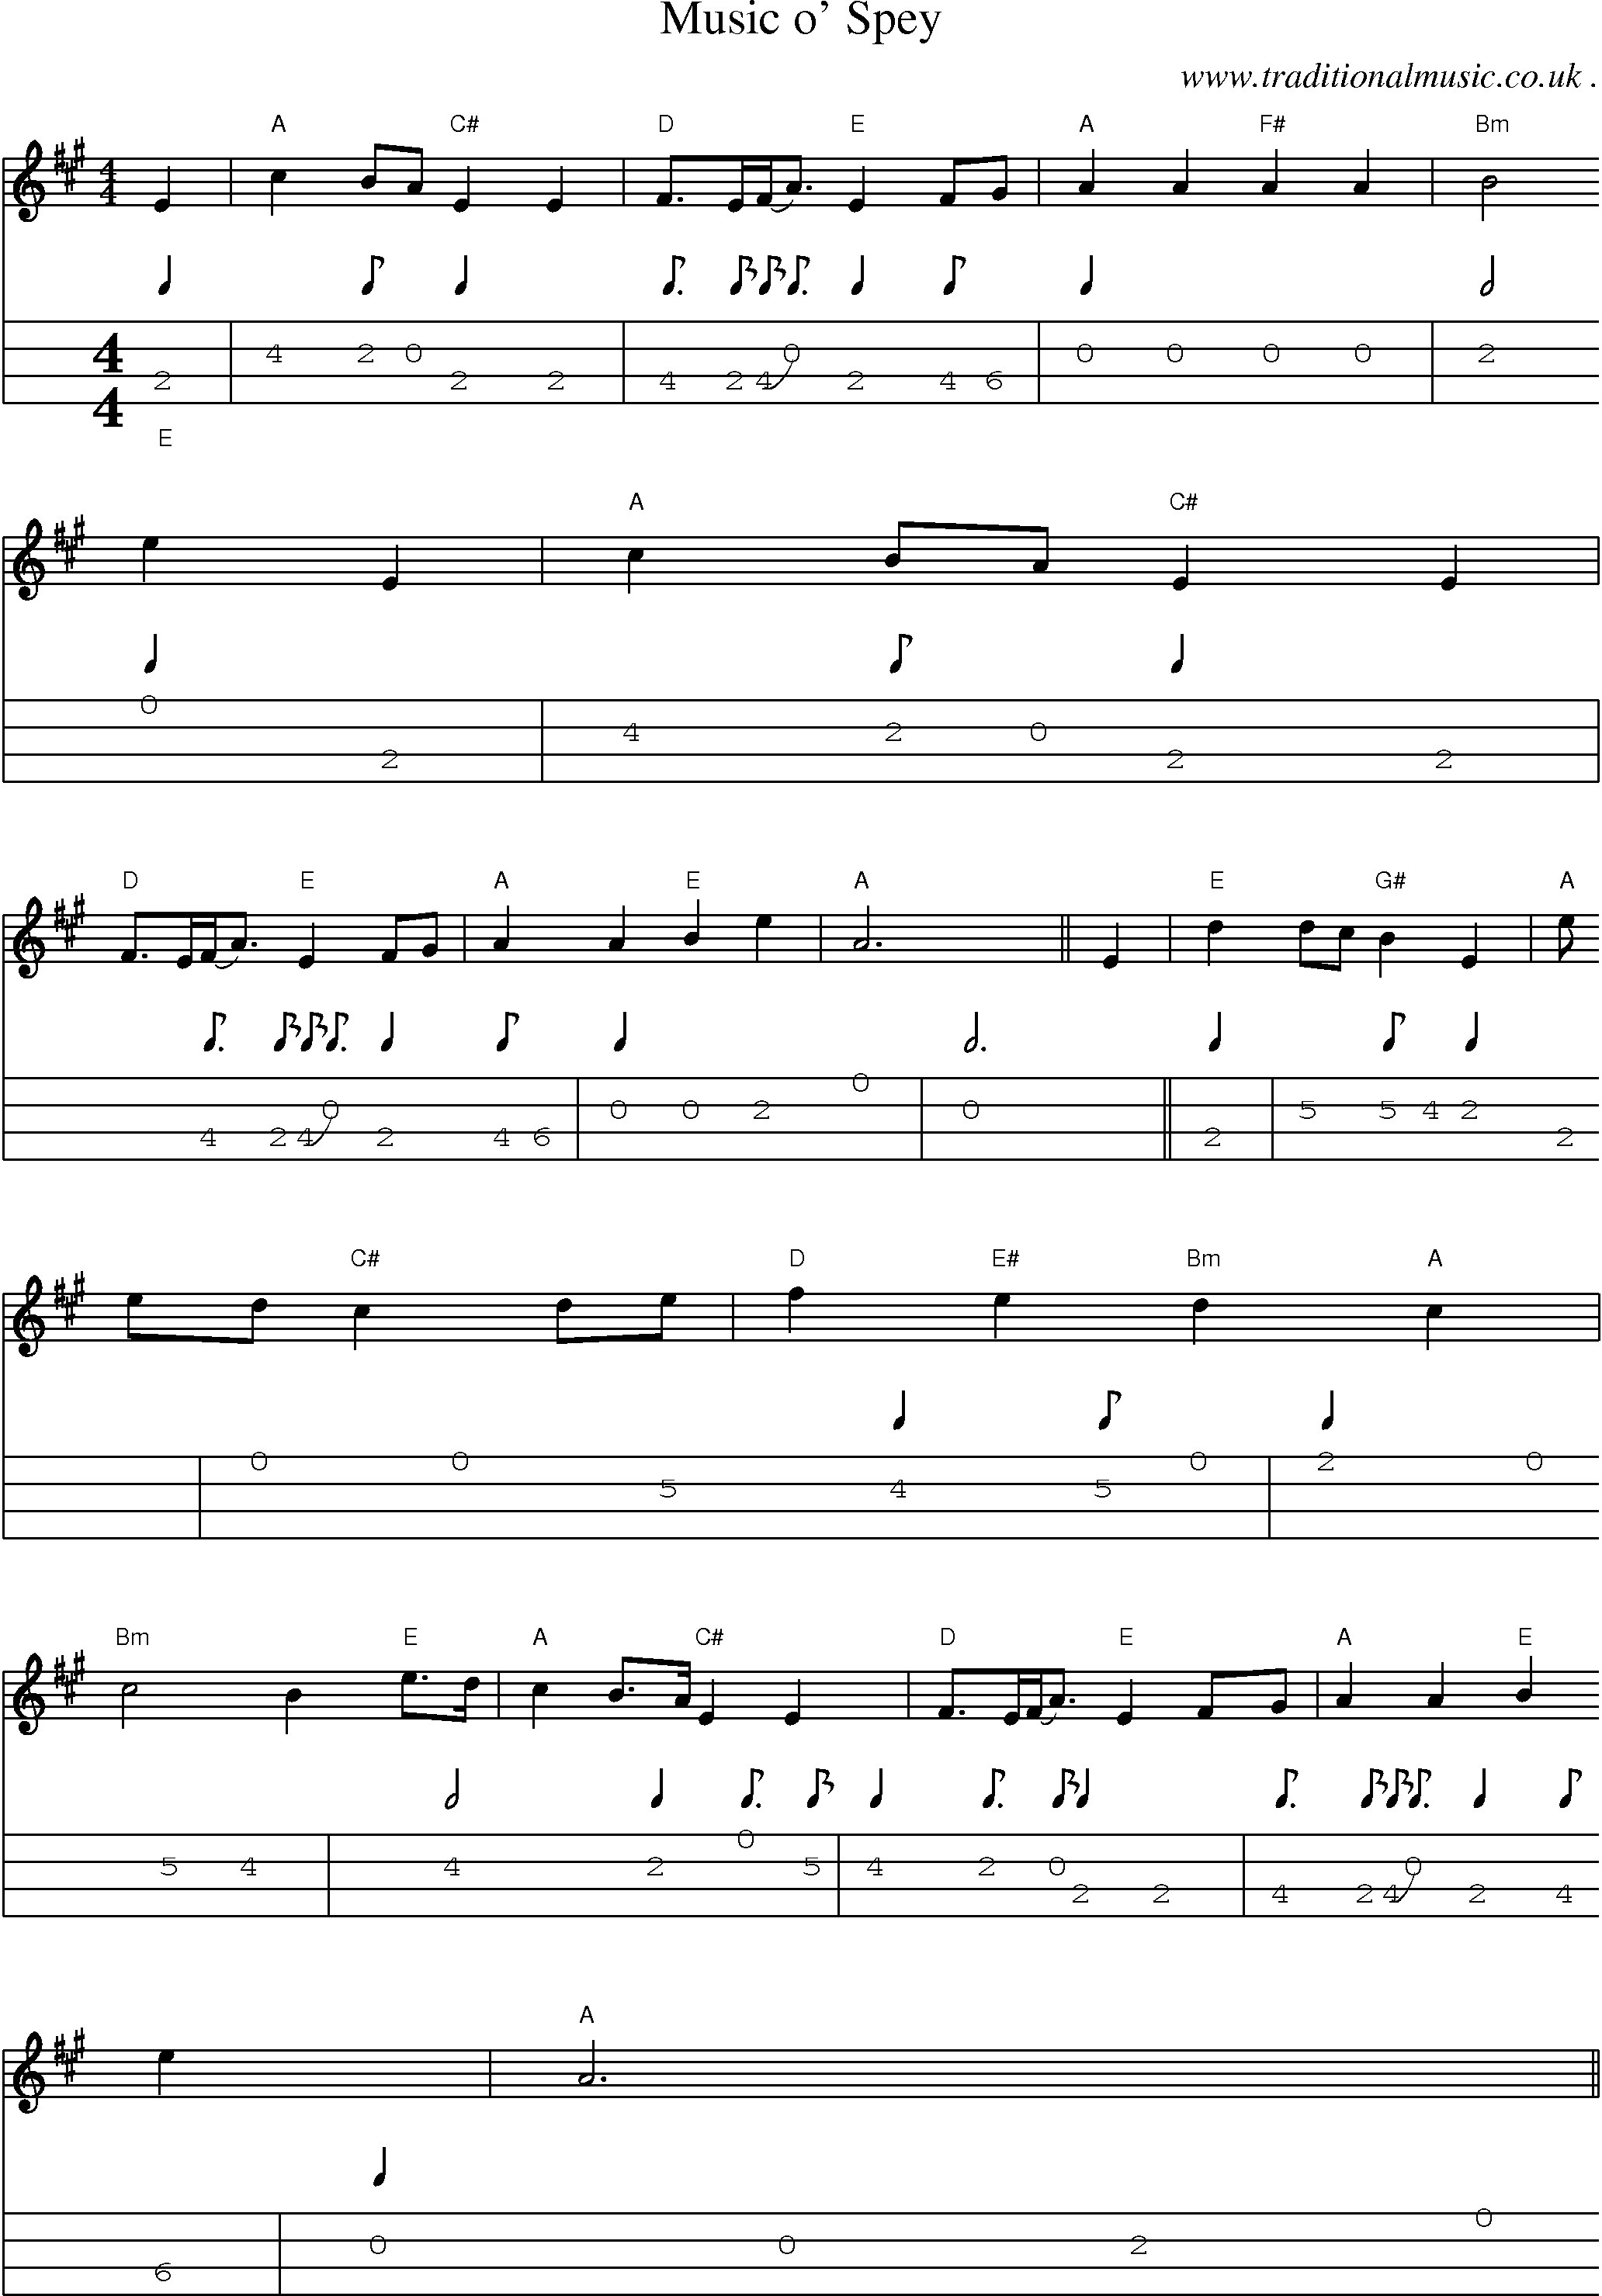 Sheet-music  score, Chords and Mandolin Tabs for Music O Spey